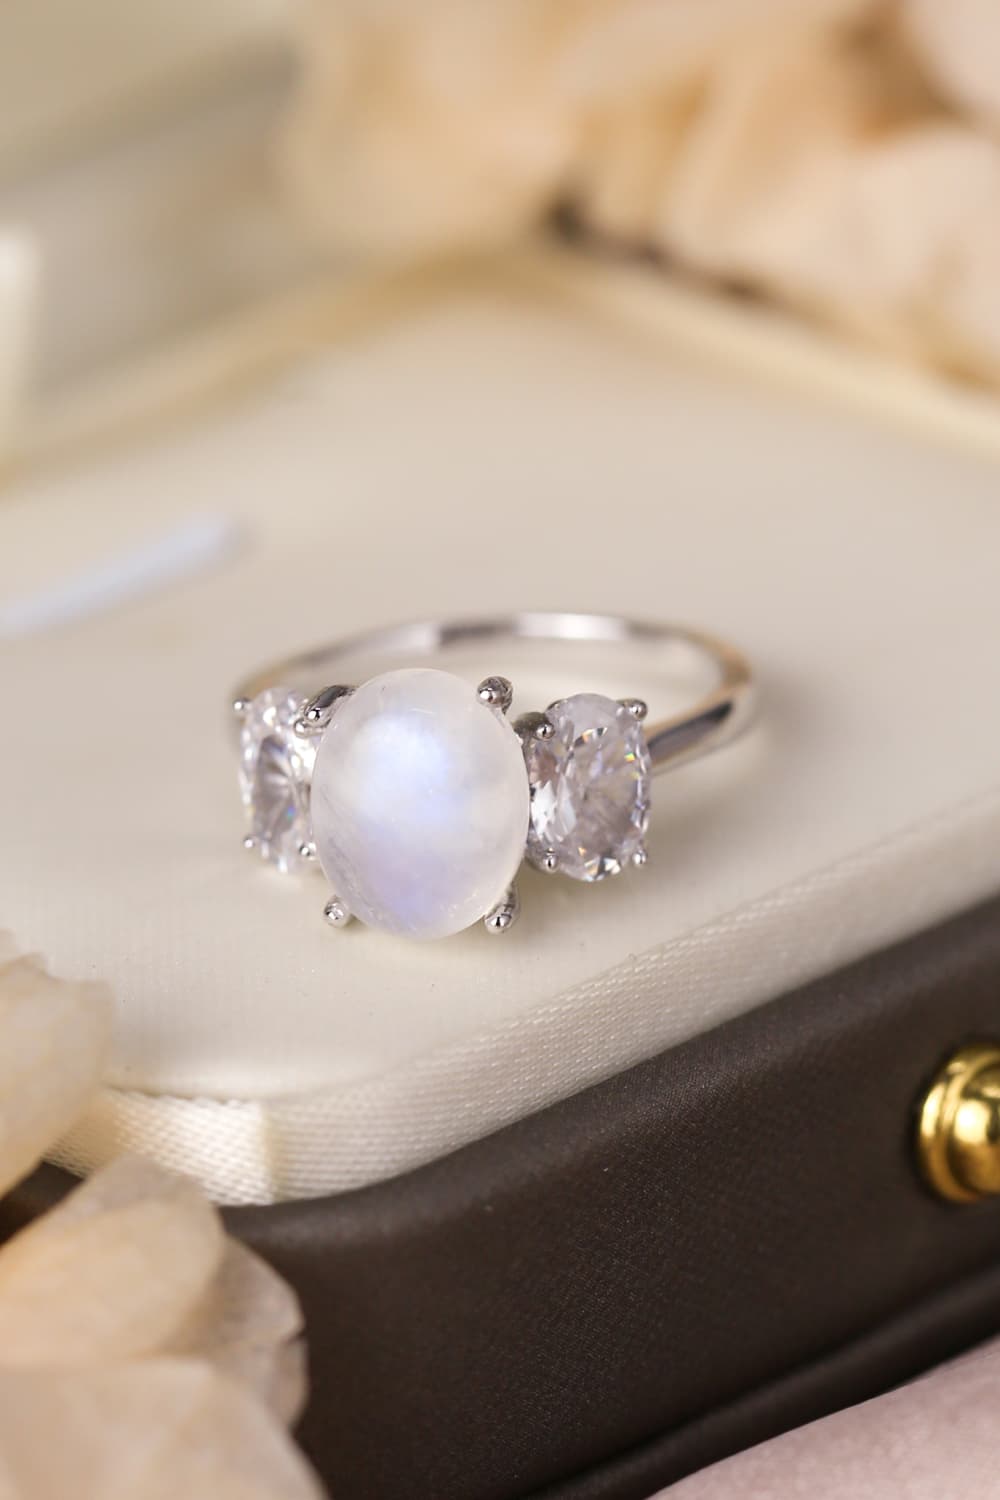 High Quality Natural Moonstone 925 Sterling Silver Three Stone Ring BLUE ZONE PLANET